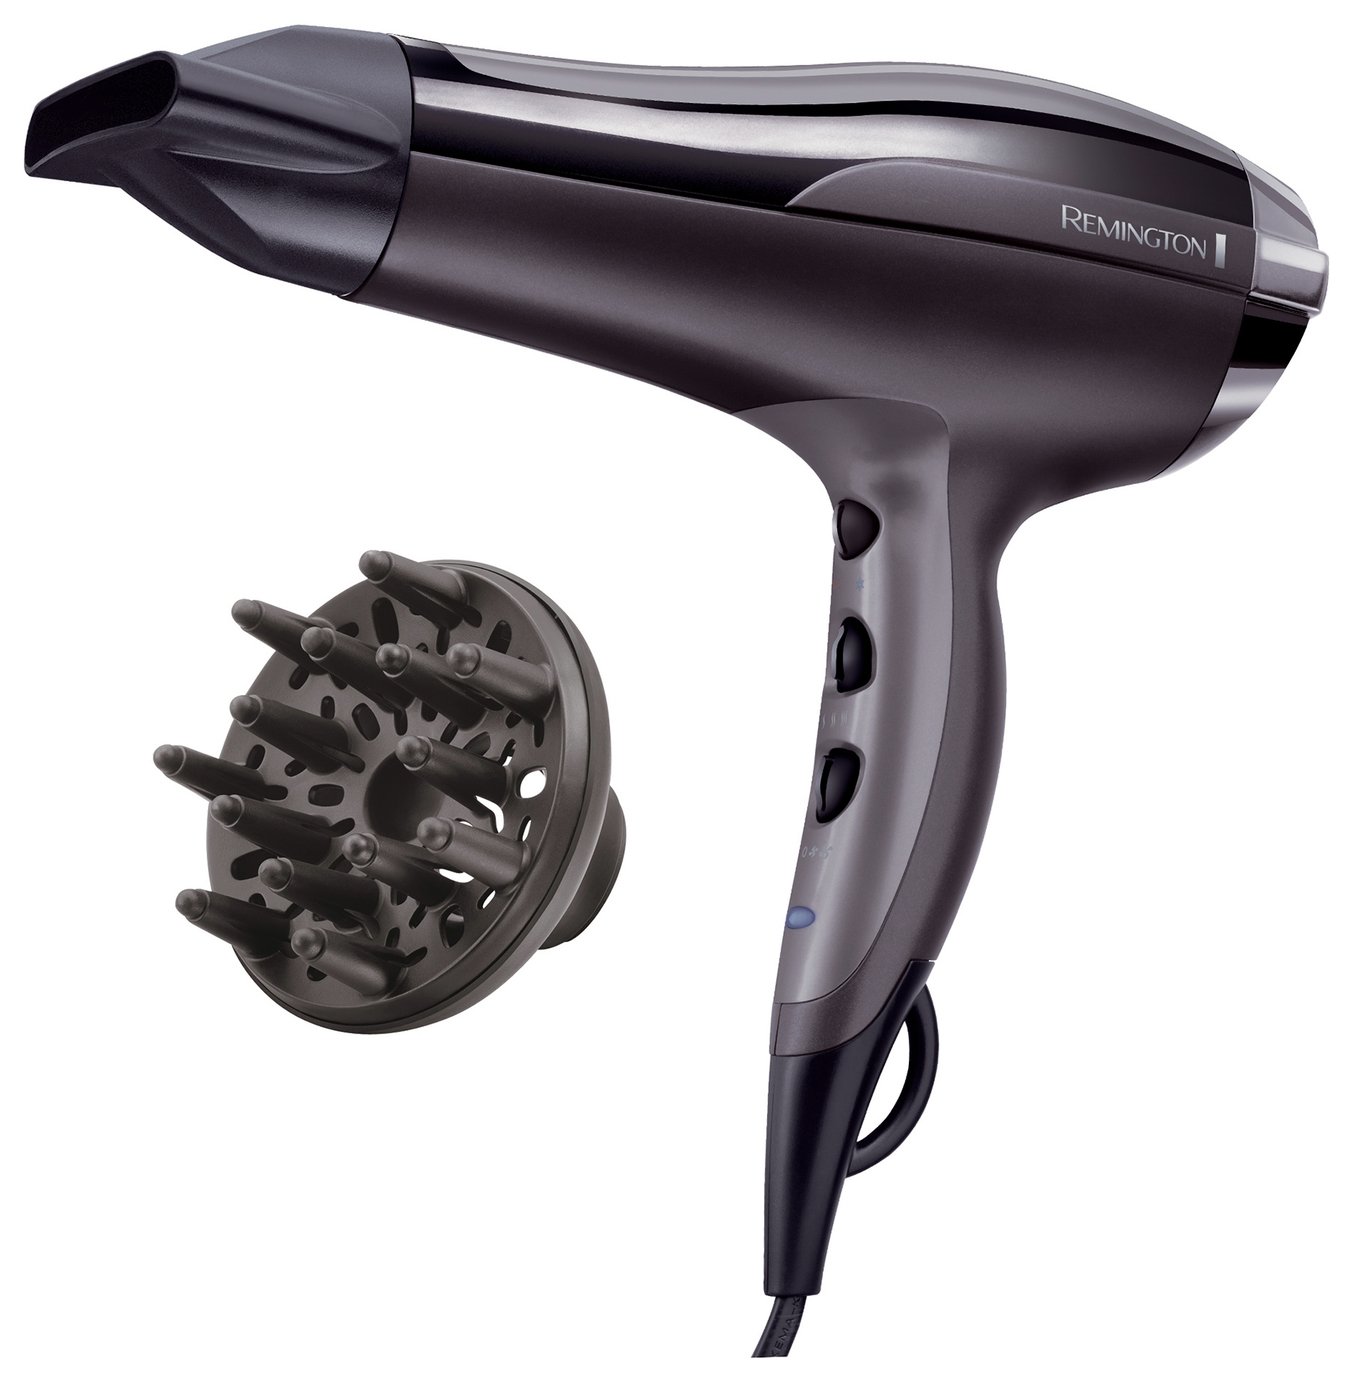 Remington D5220 Pro Air Turbo Hair Dryer with Diffuser